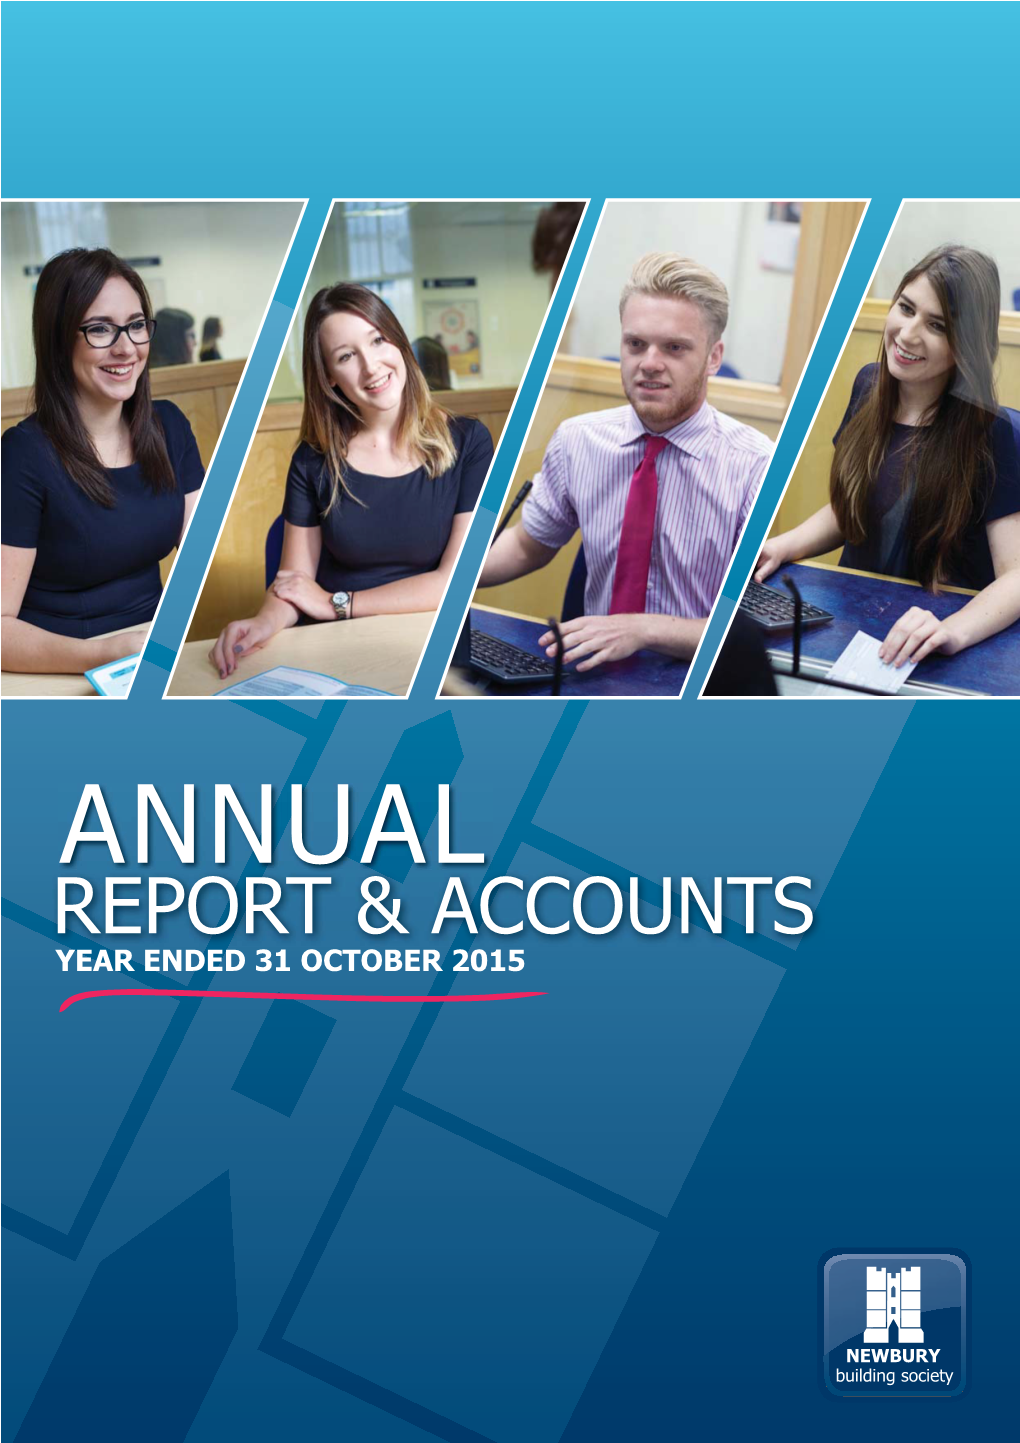 Annual Report & Accounts Year Ended 31 October 2015